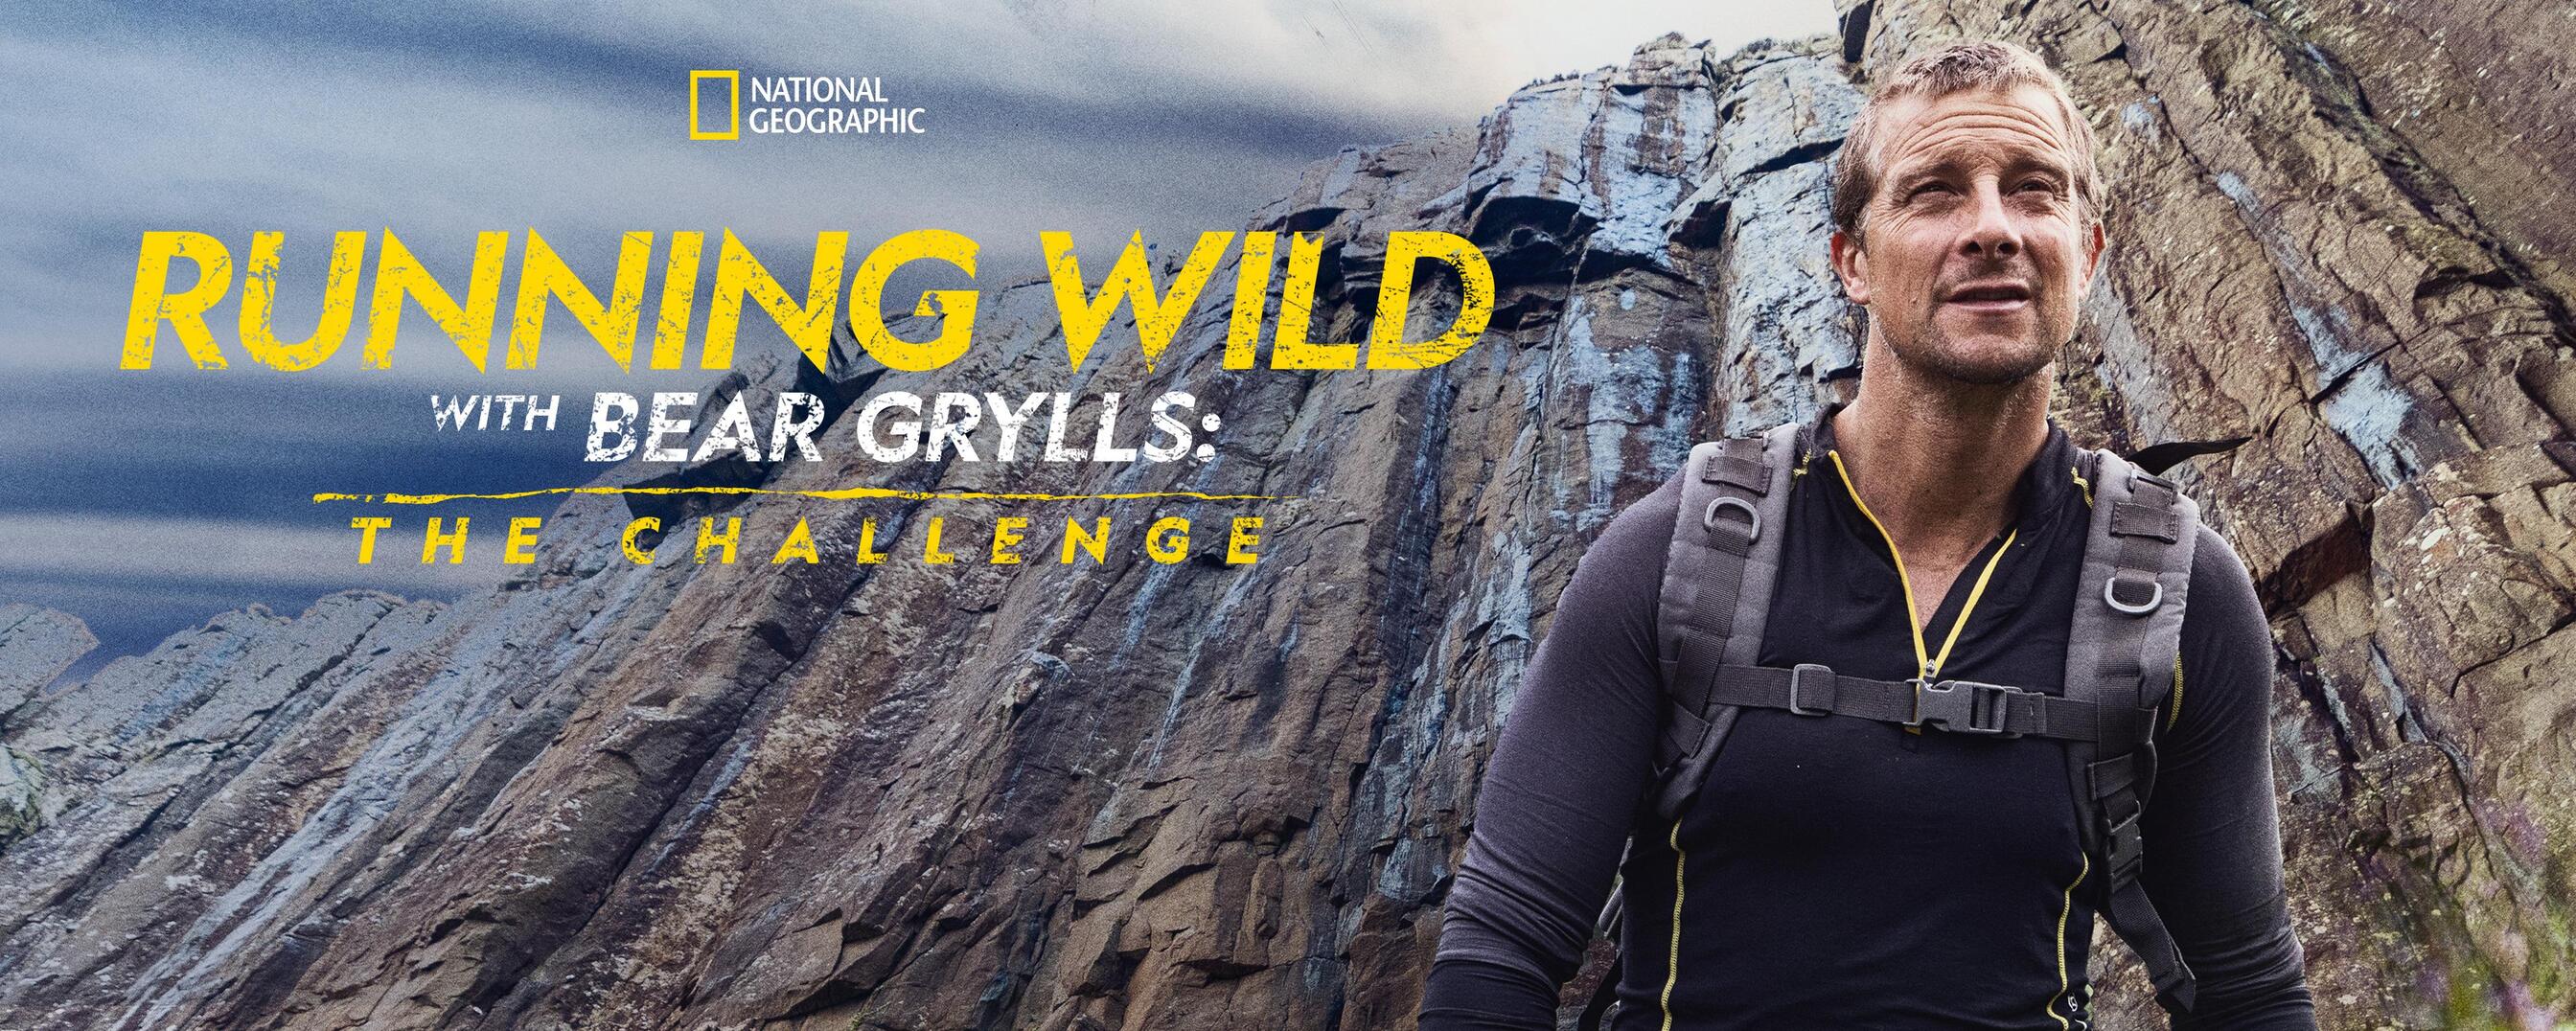 About Running Wild with Bear Grylls: The Challenge TV Show Series